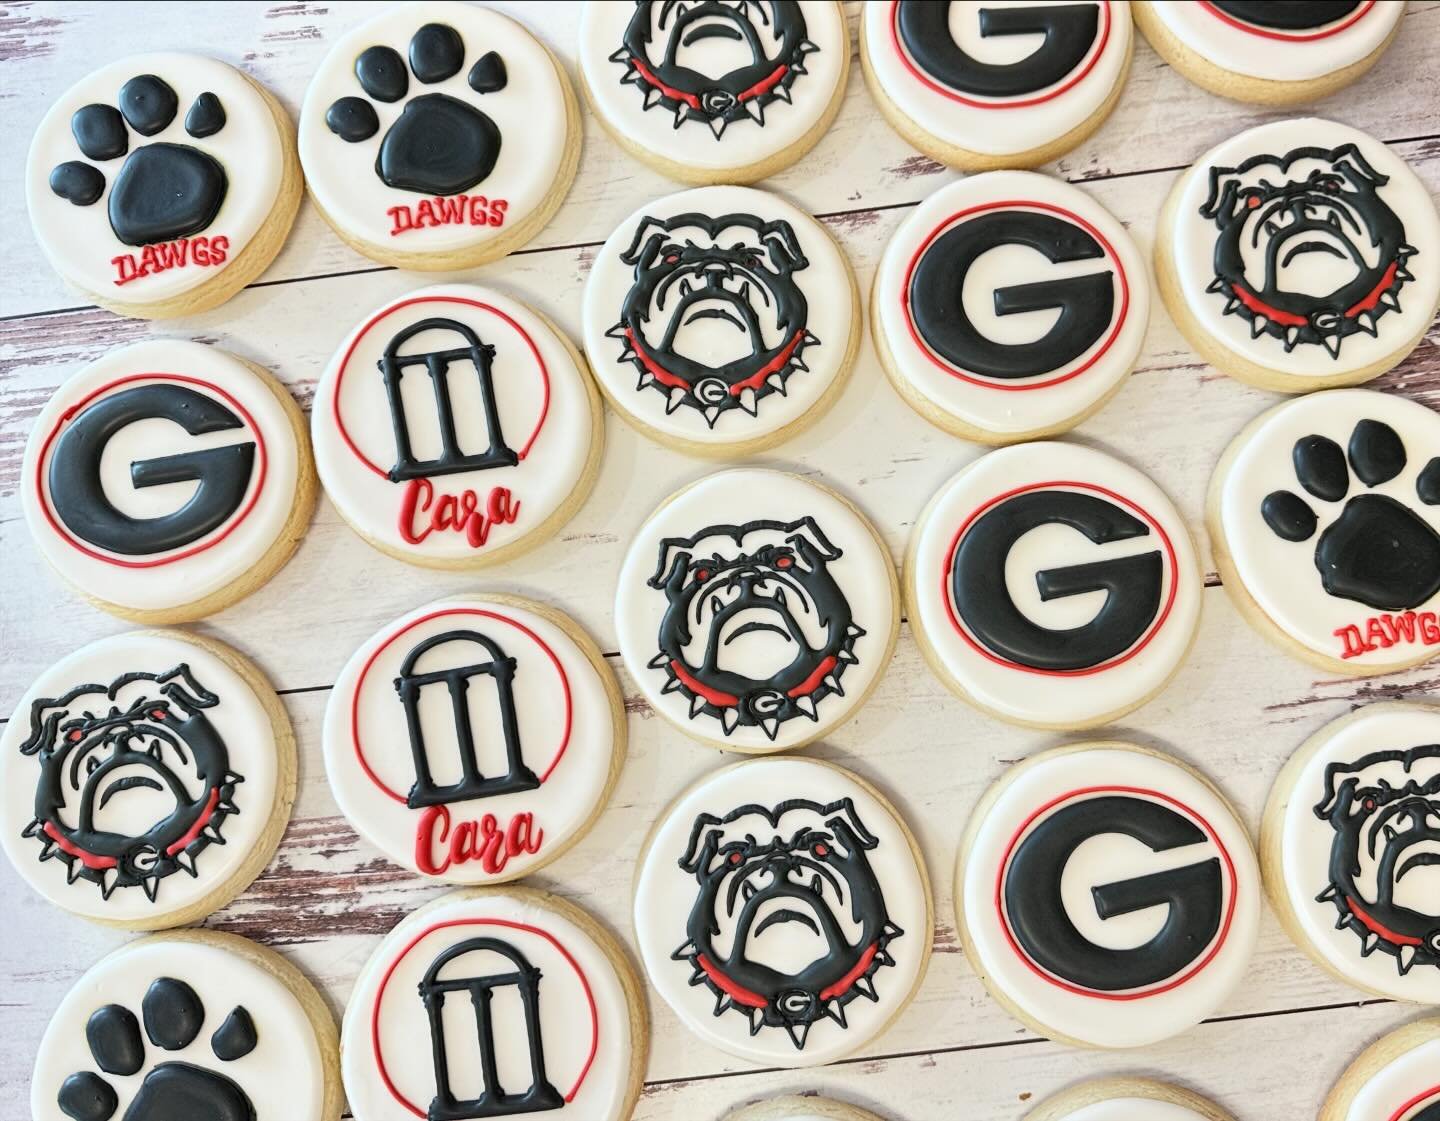 One of three sets of #collegecookies shipped to Atlanta yesterday! Stay tuned for another college reveal tomorrow. #ugacookies #jojoscookieboutique #hayesvillenc